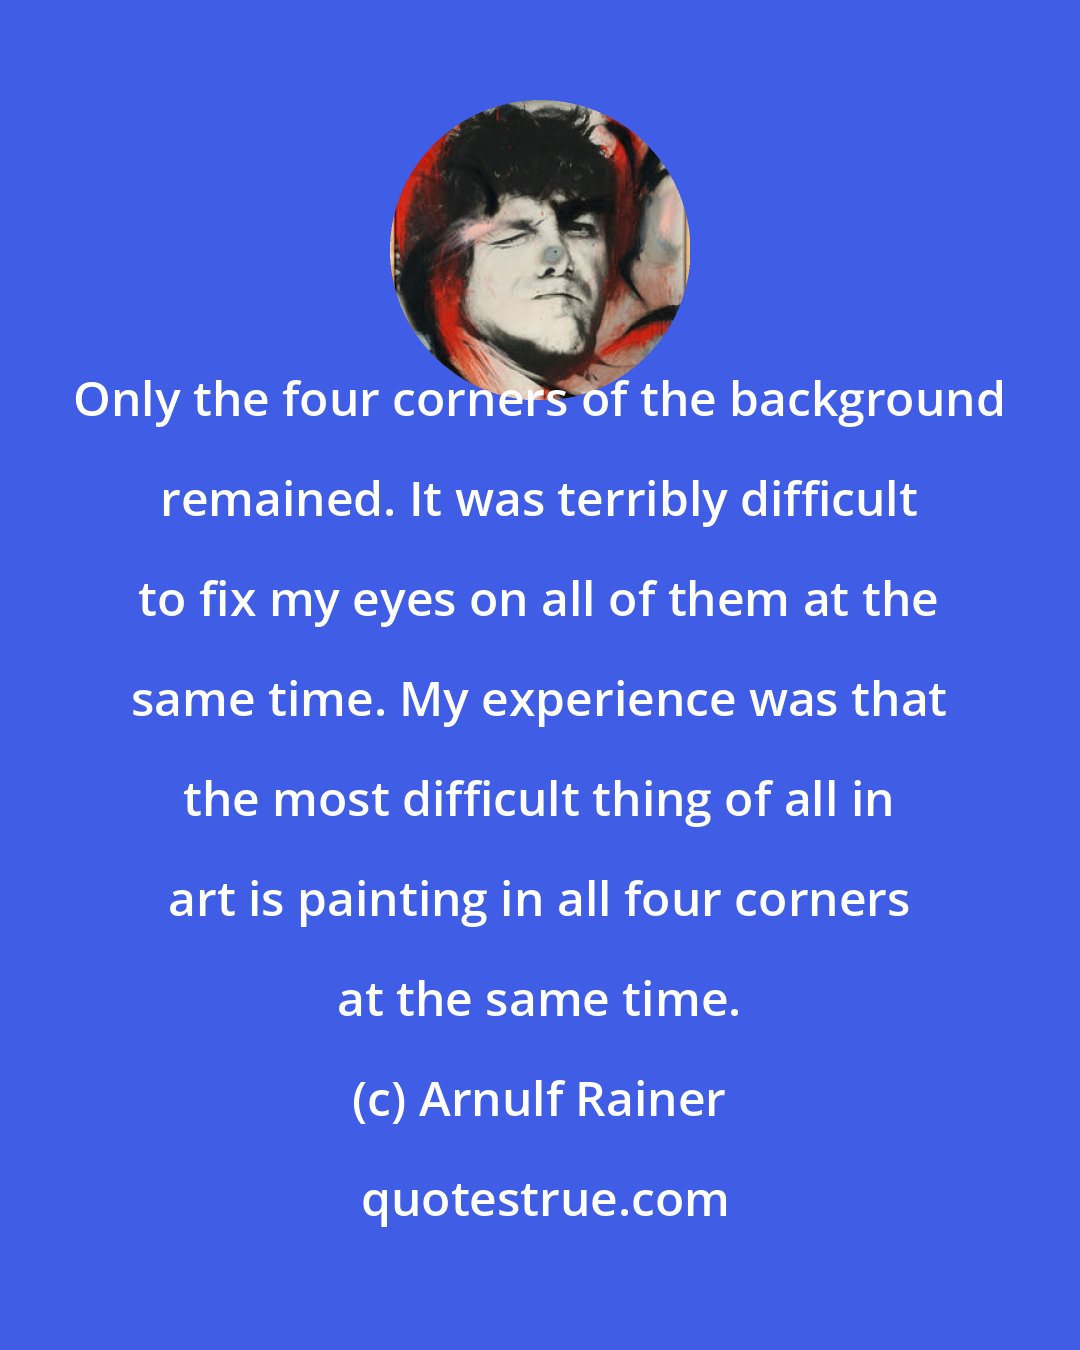 Arnulf Rainer: Only the four corners of the background remained. It was terribly difficult to fix my eyes on all of them at the same time. My experience was that the most difficult thing of all in art is painting in all four corners at the same time.